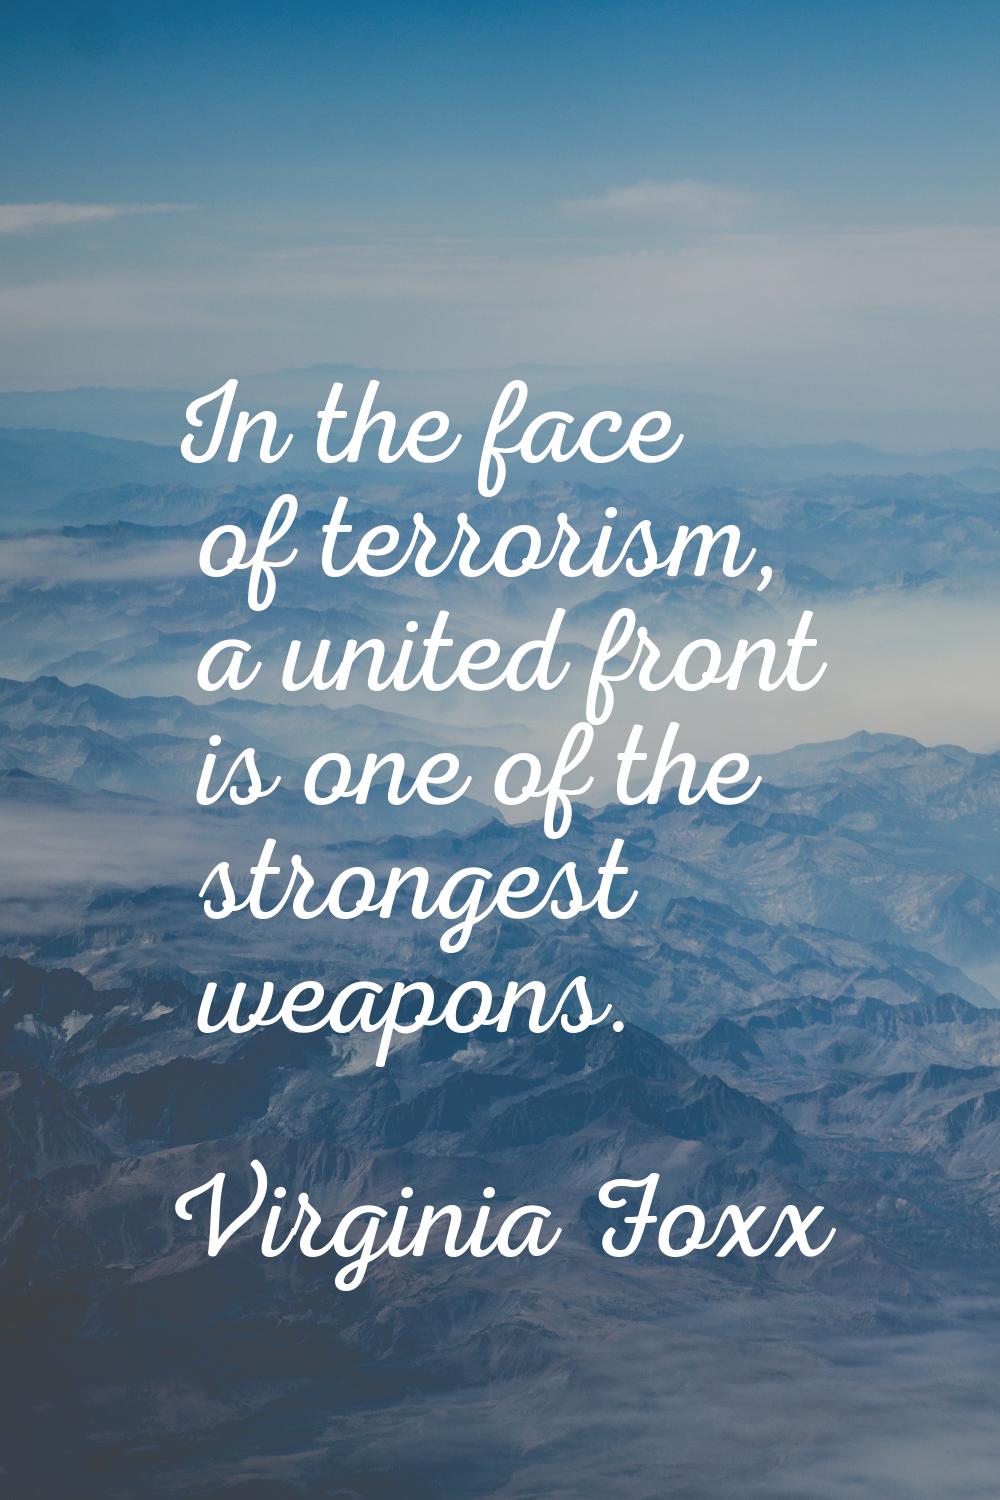 In the face of terrorism, a united front is one of the strongest weapons.